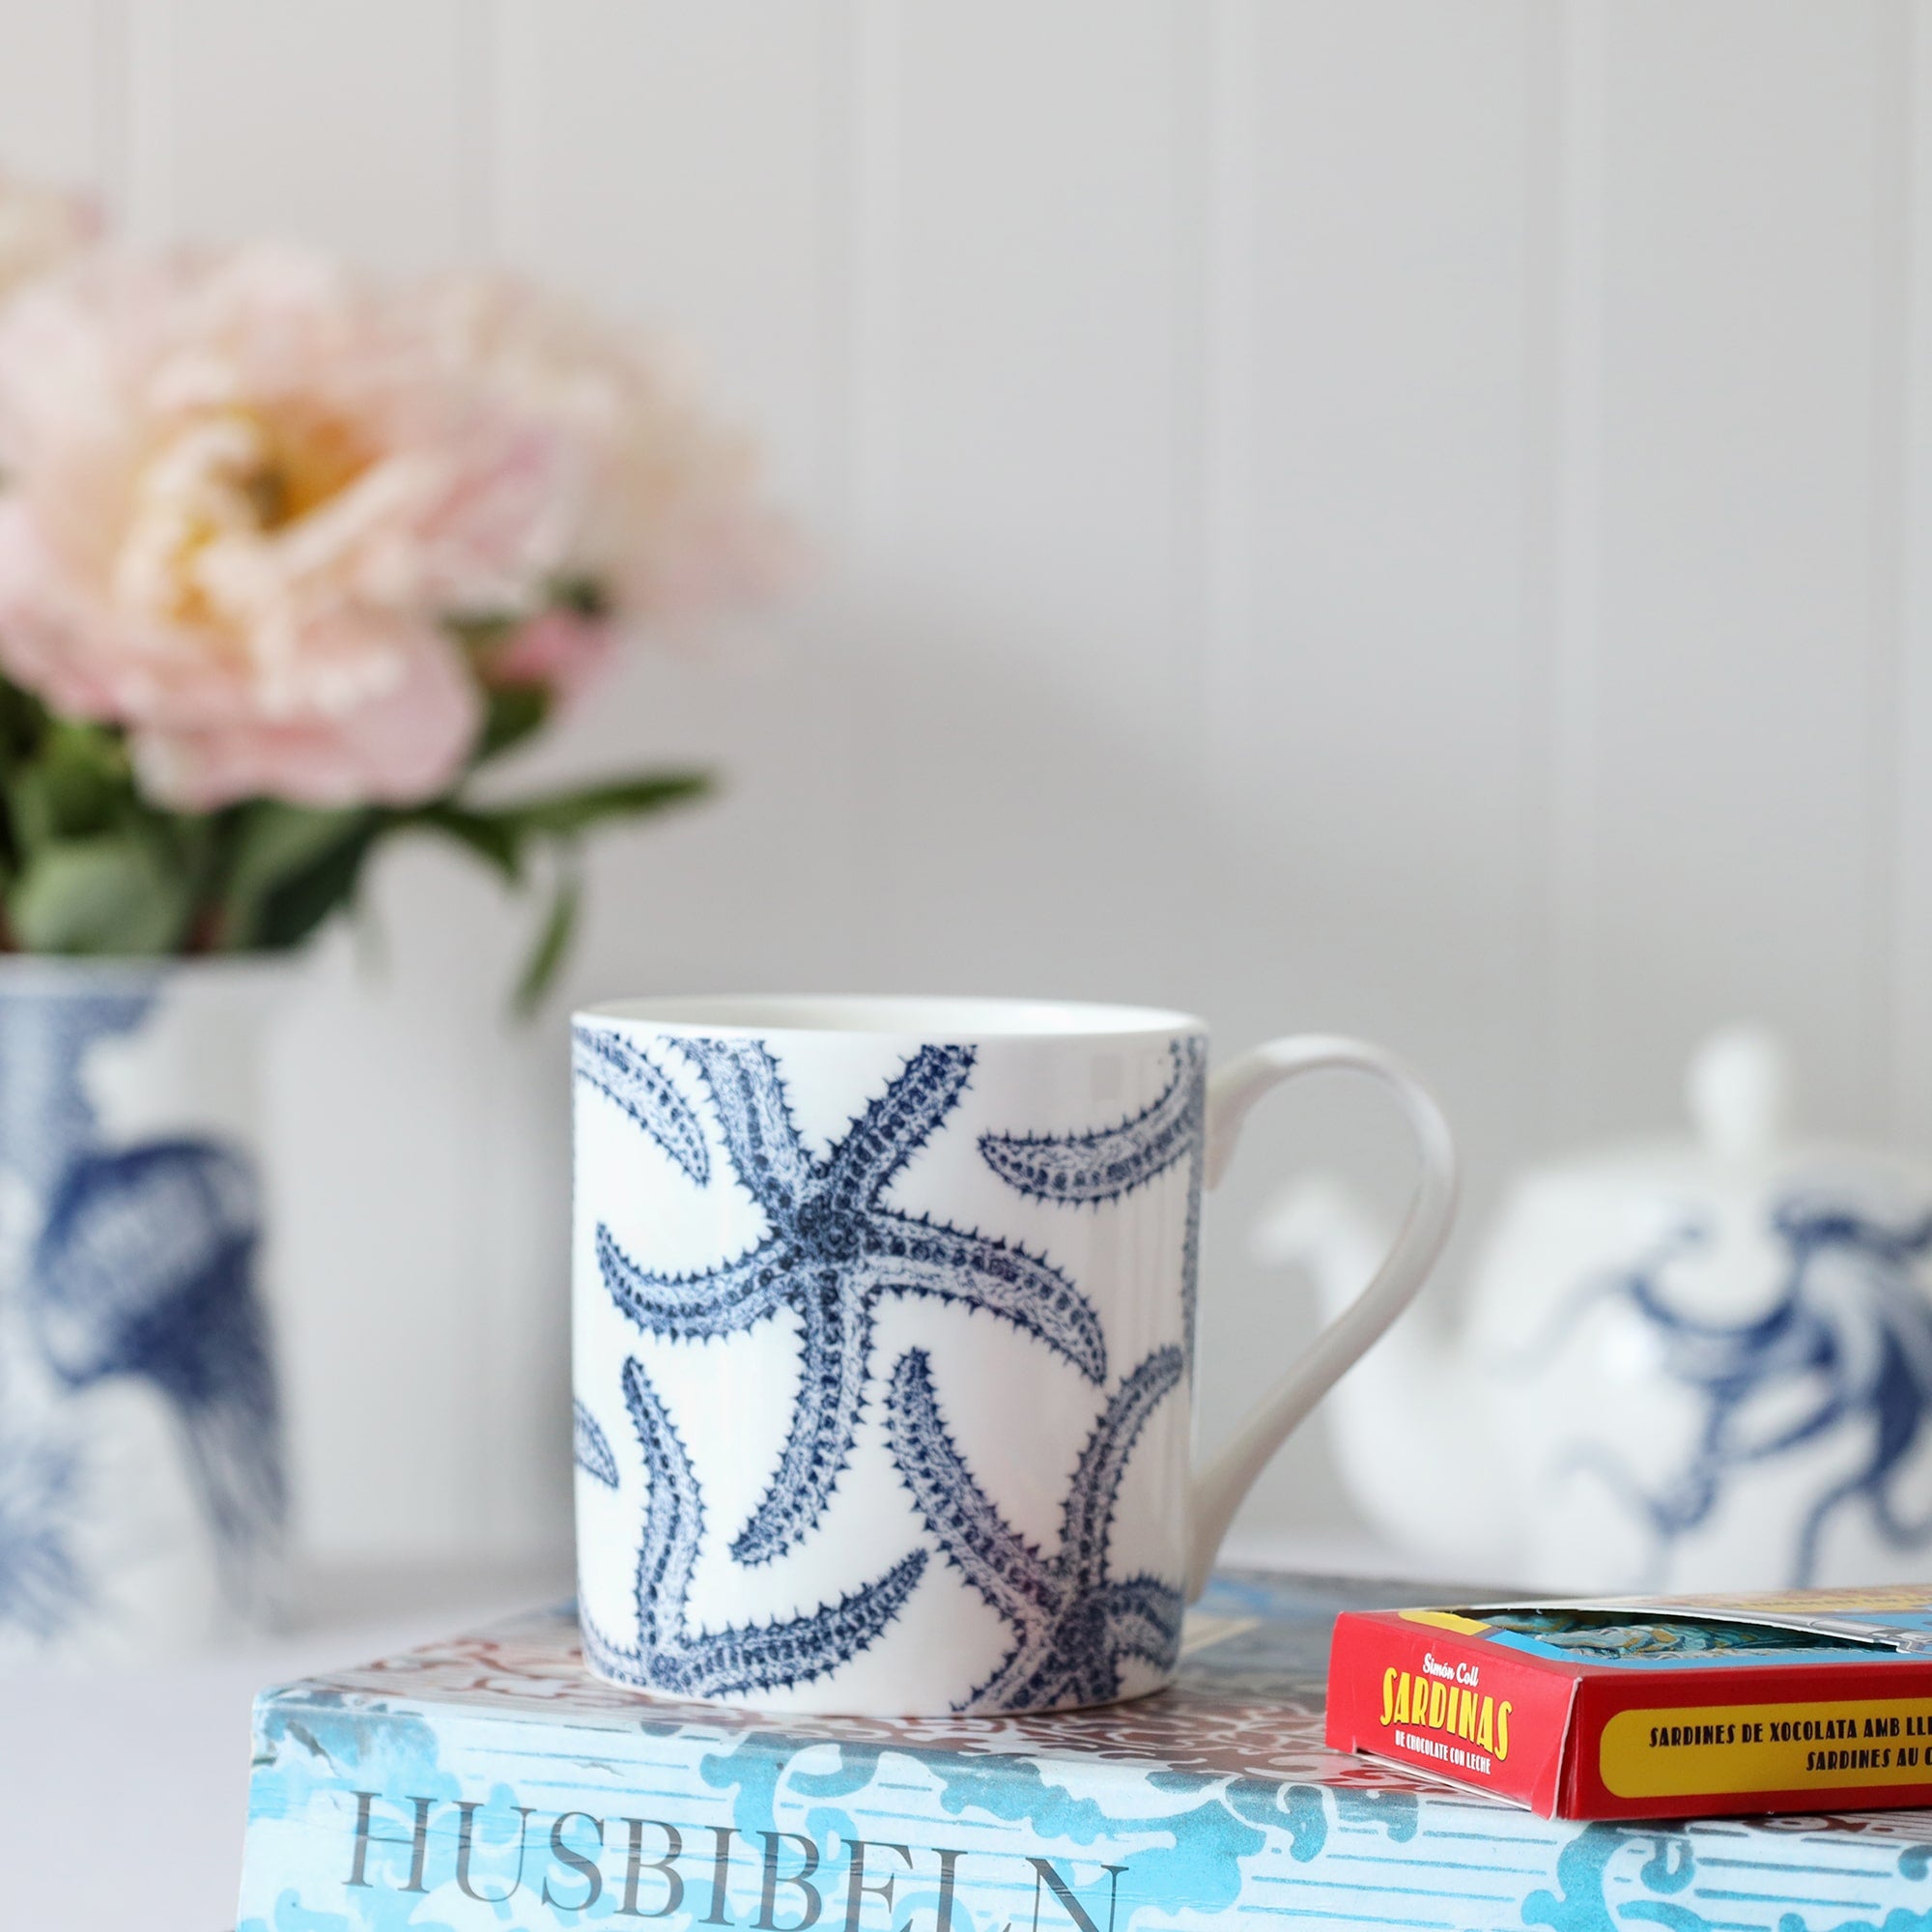 A blue & white informal table setting set against a white shiplap wall and linen tablecloth. An octopus design adorns a teapot which is pouring tea into a white bone china mug decorated with a blue illustrated multi starfish design..